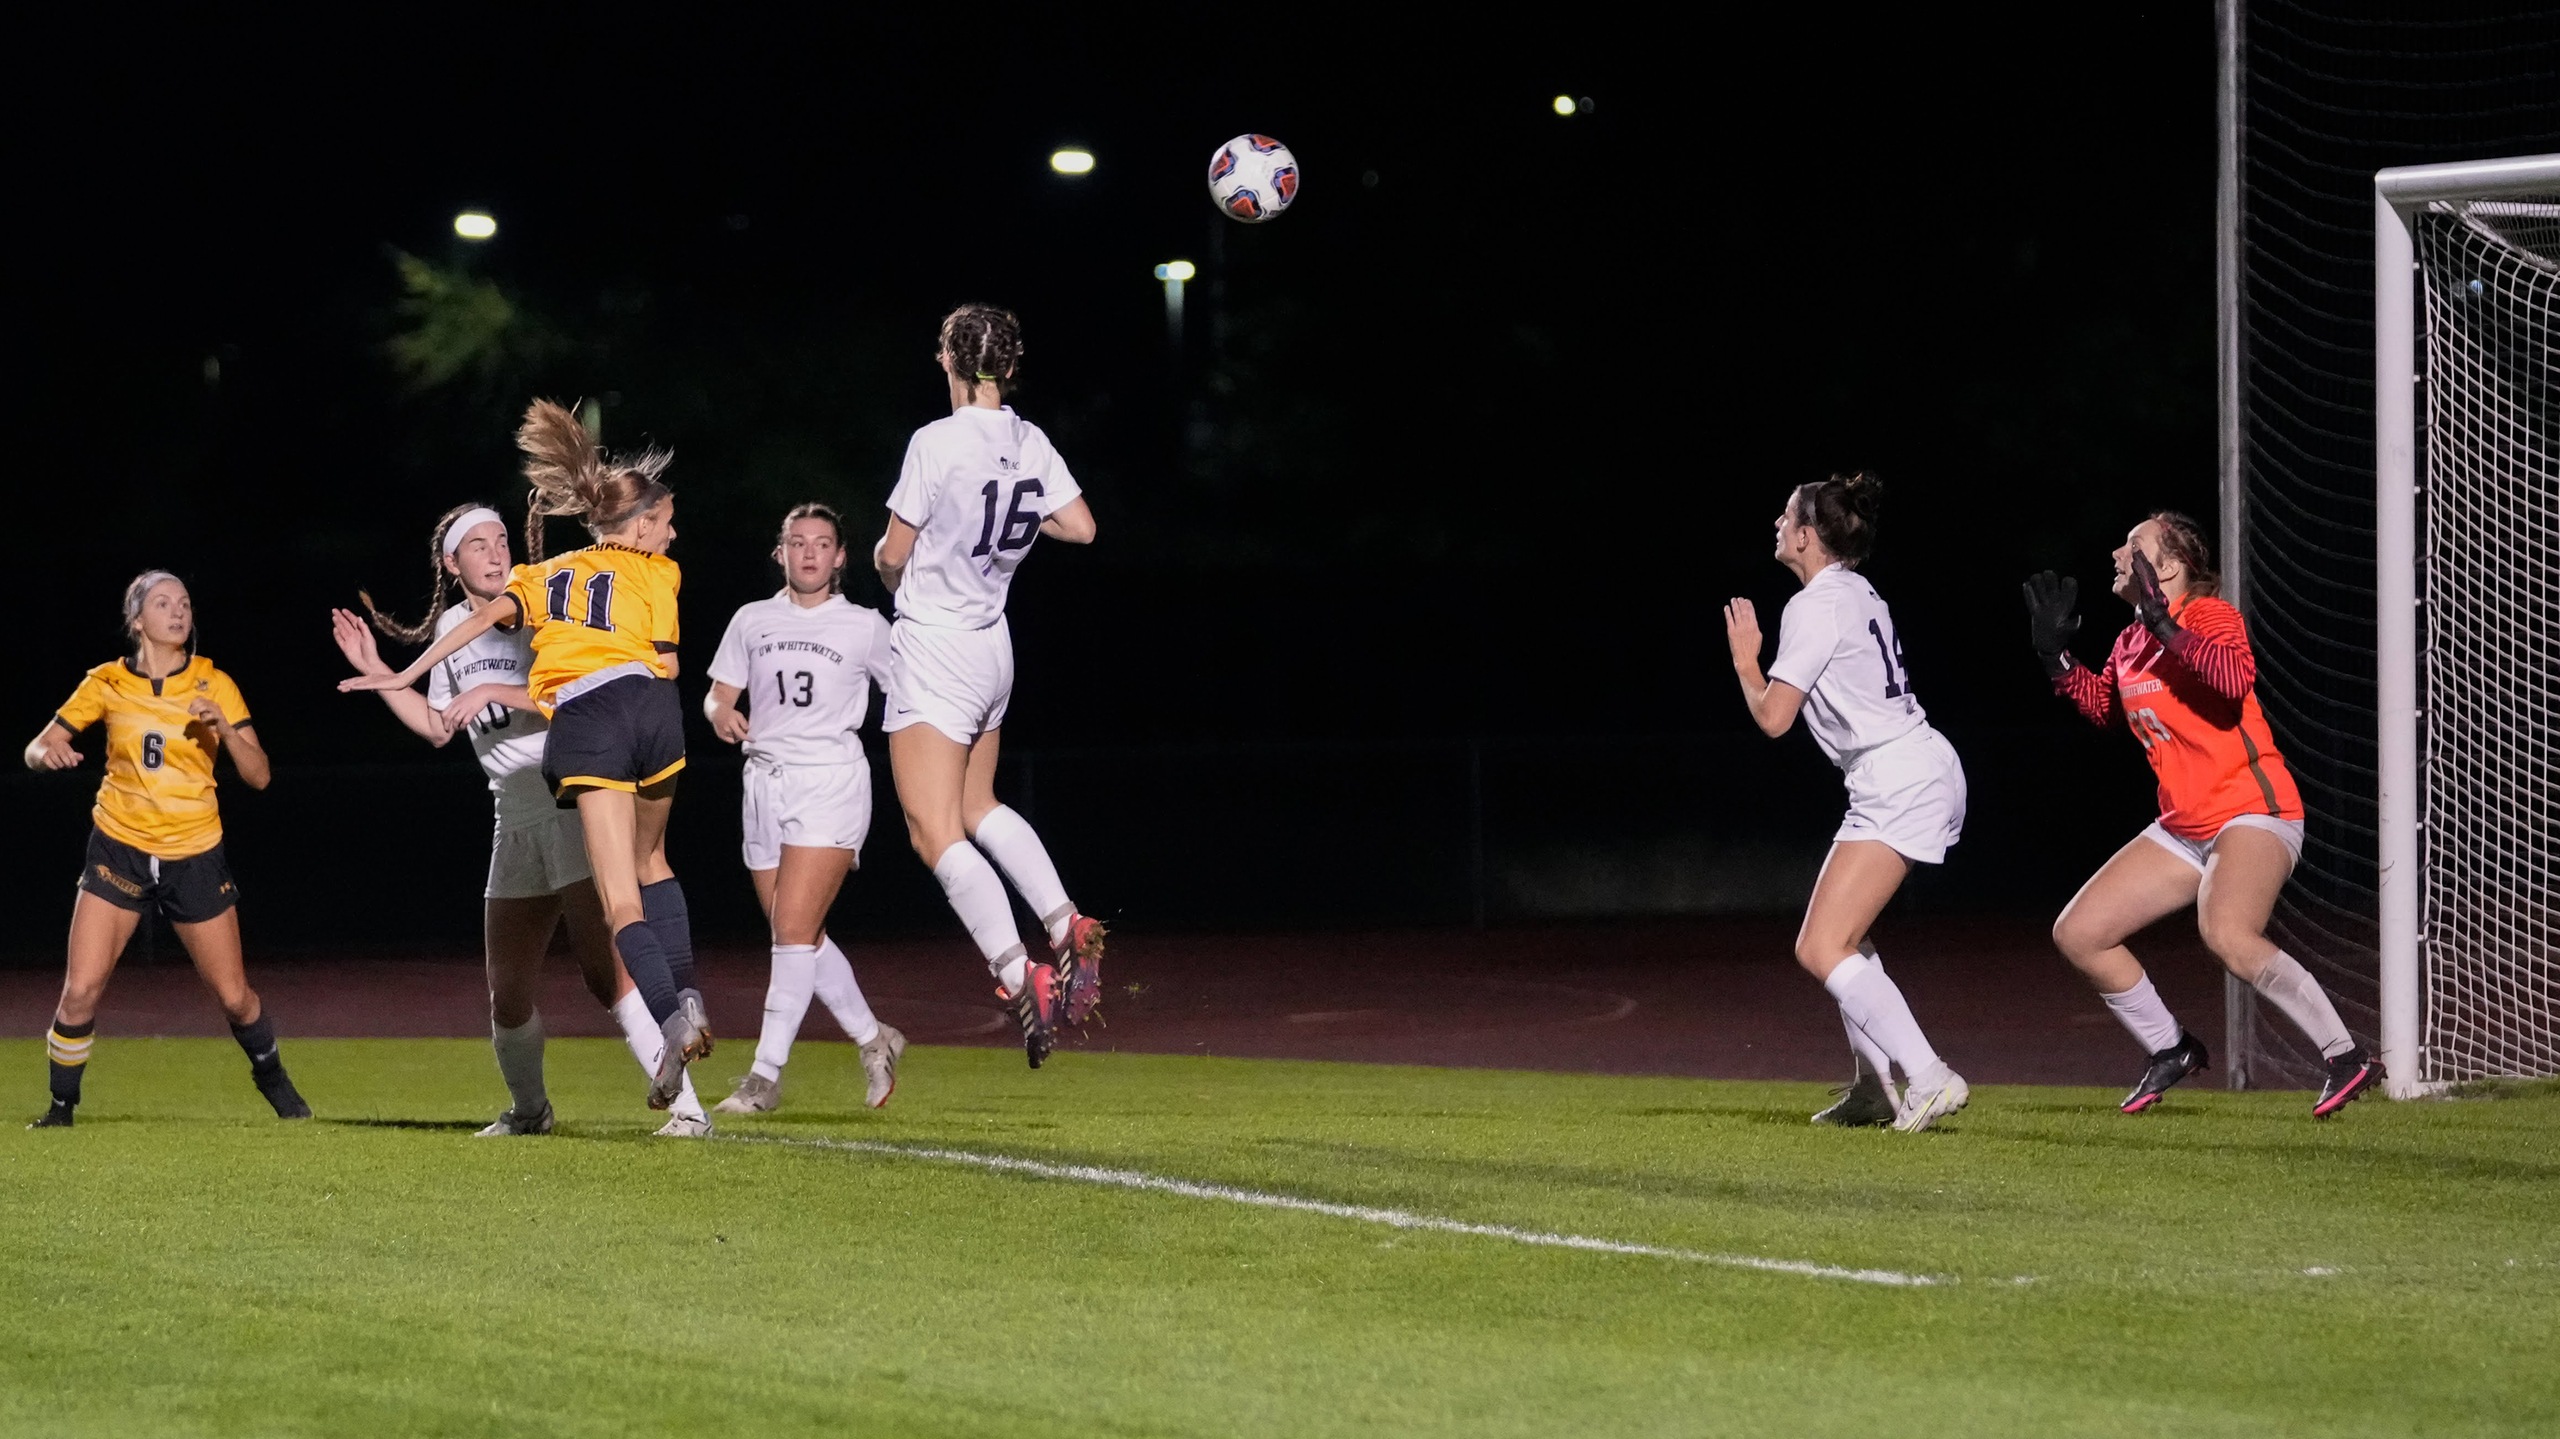 Molly Jackson's 6-yard header gave the Titans a 4-1 lead over the Warhawks.